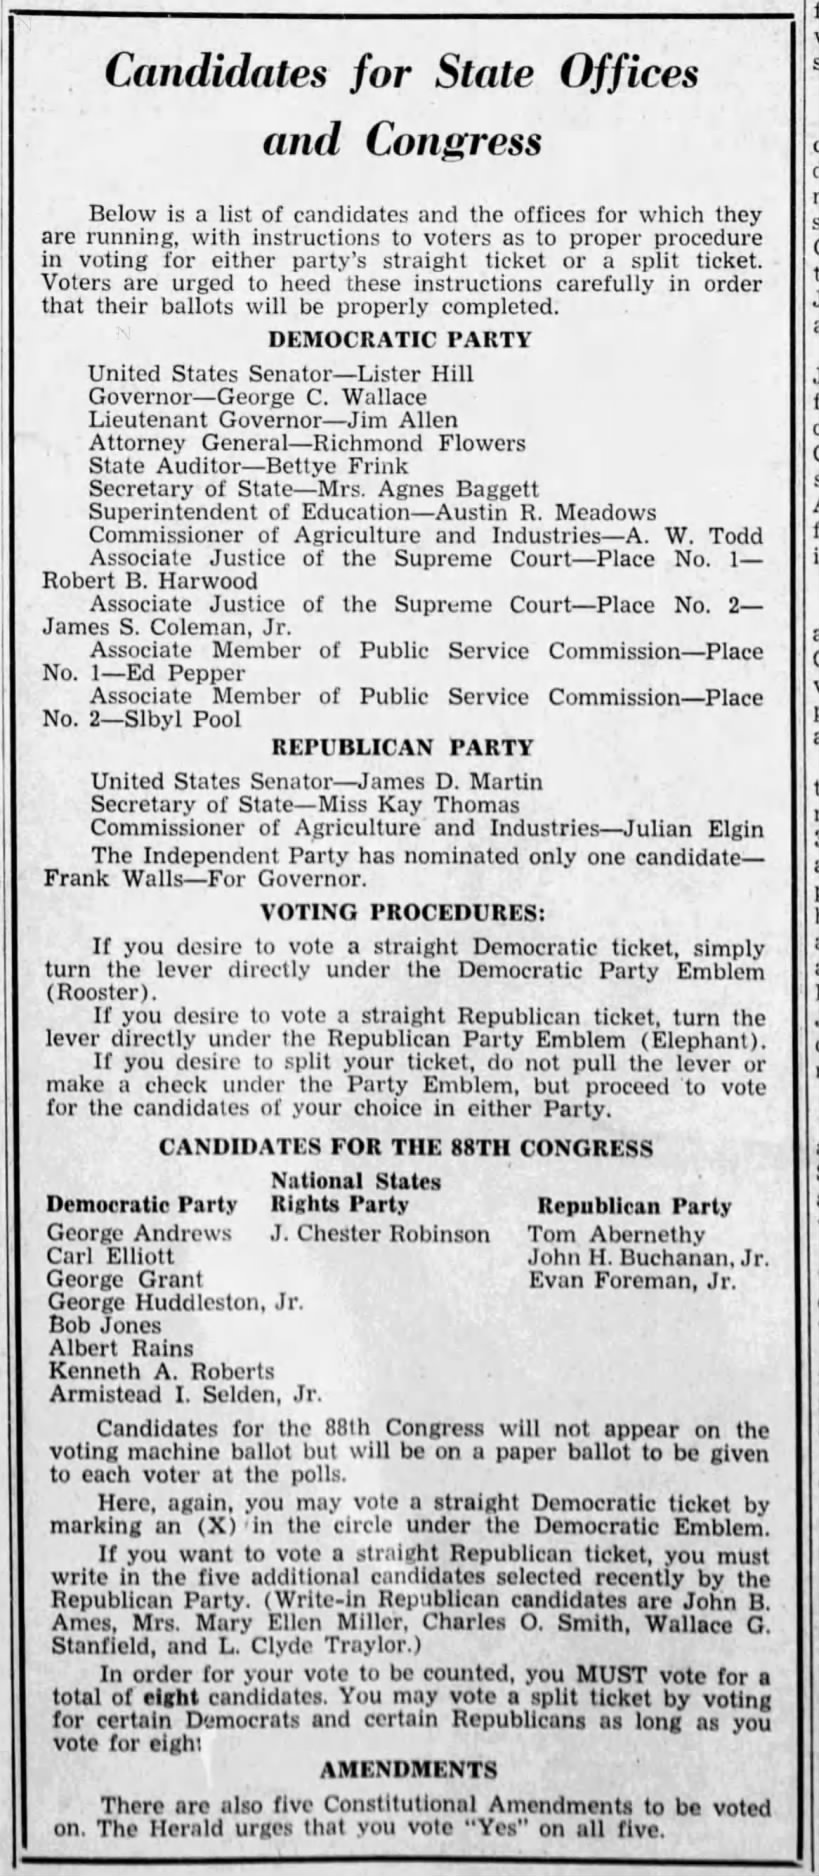 Candidates for State Offices and Congress